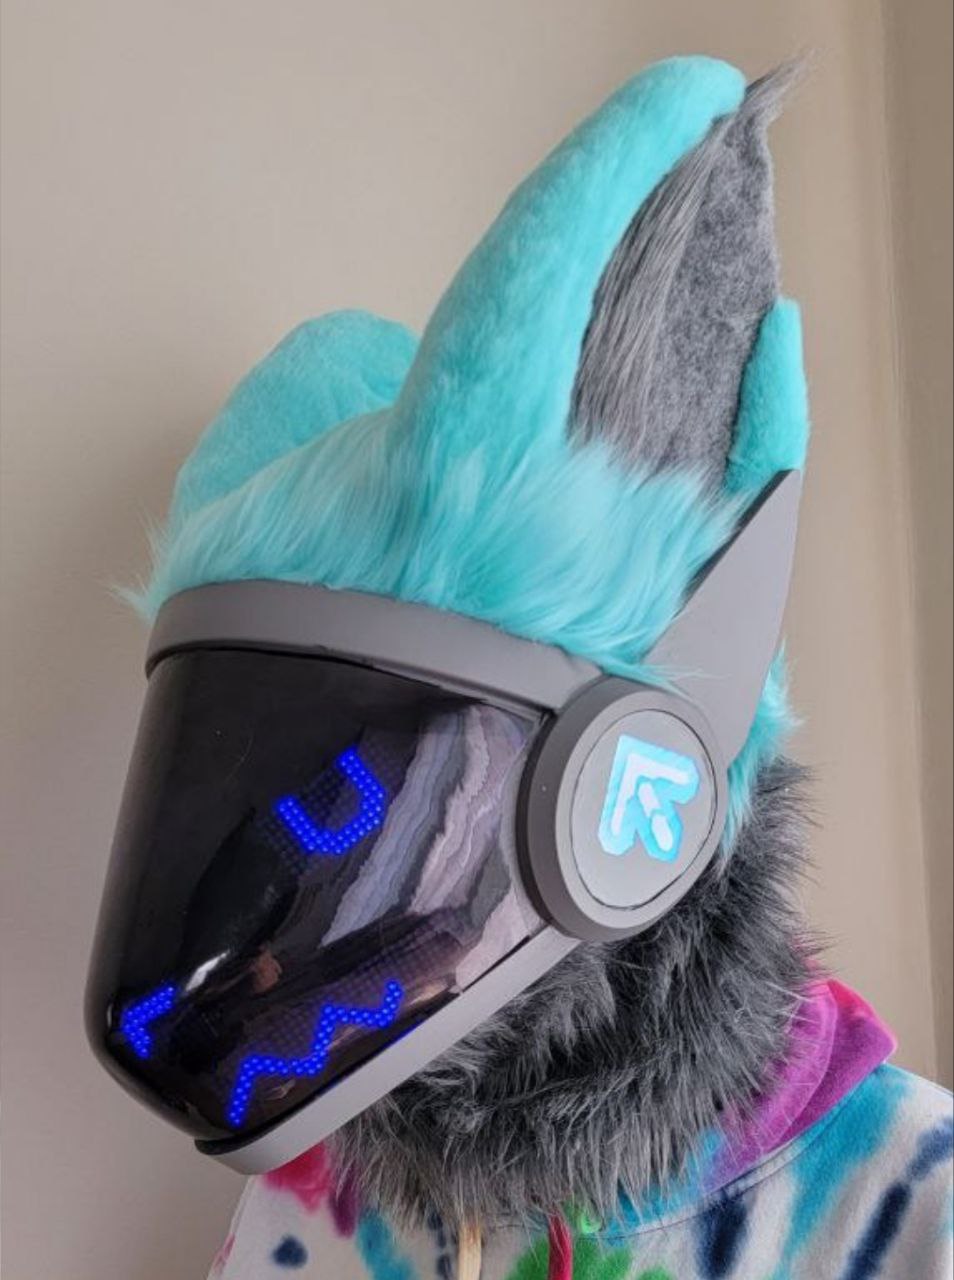 I'm thinking of selling my old Protogen Mask. What's a good price